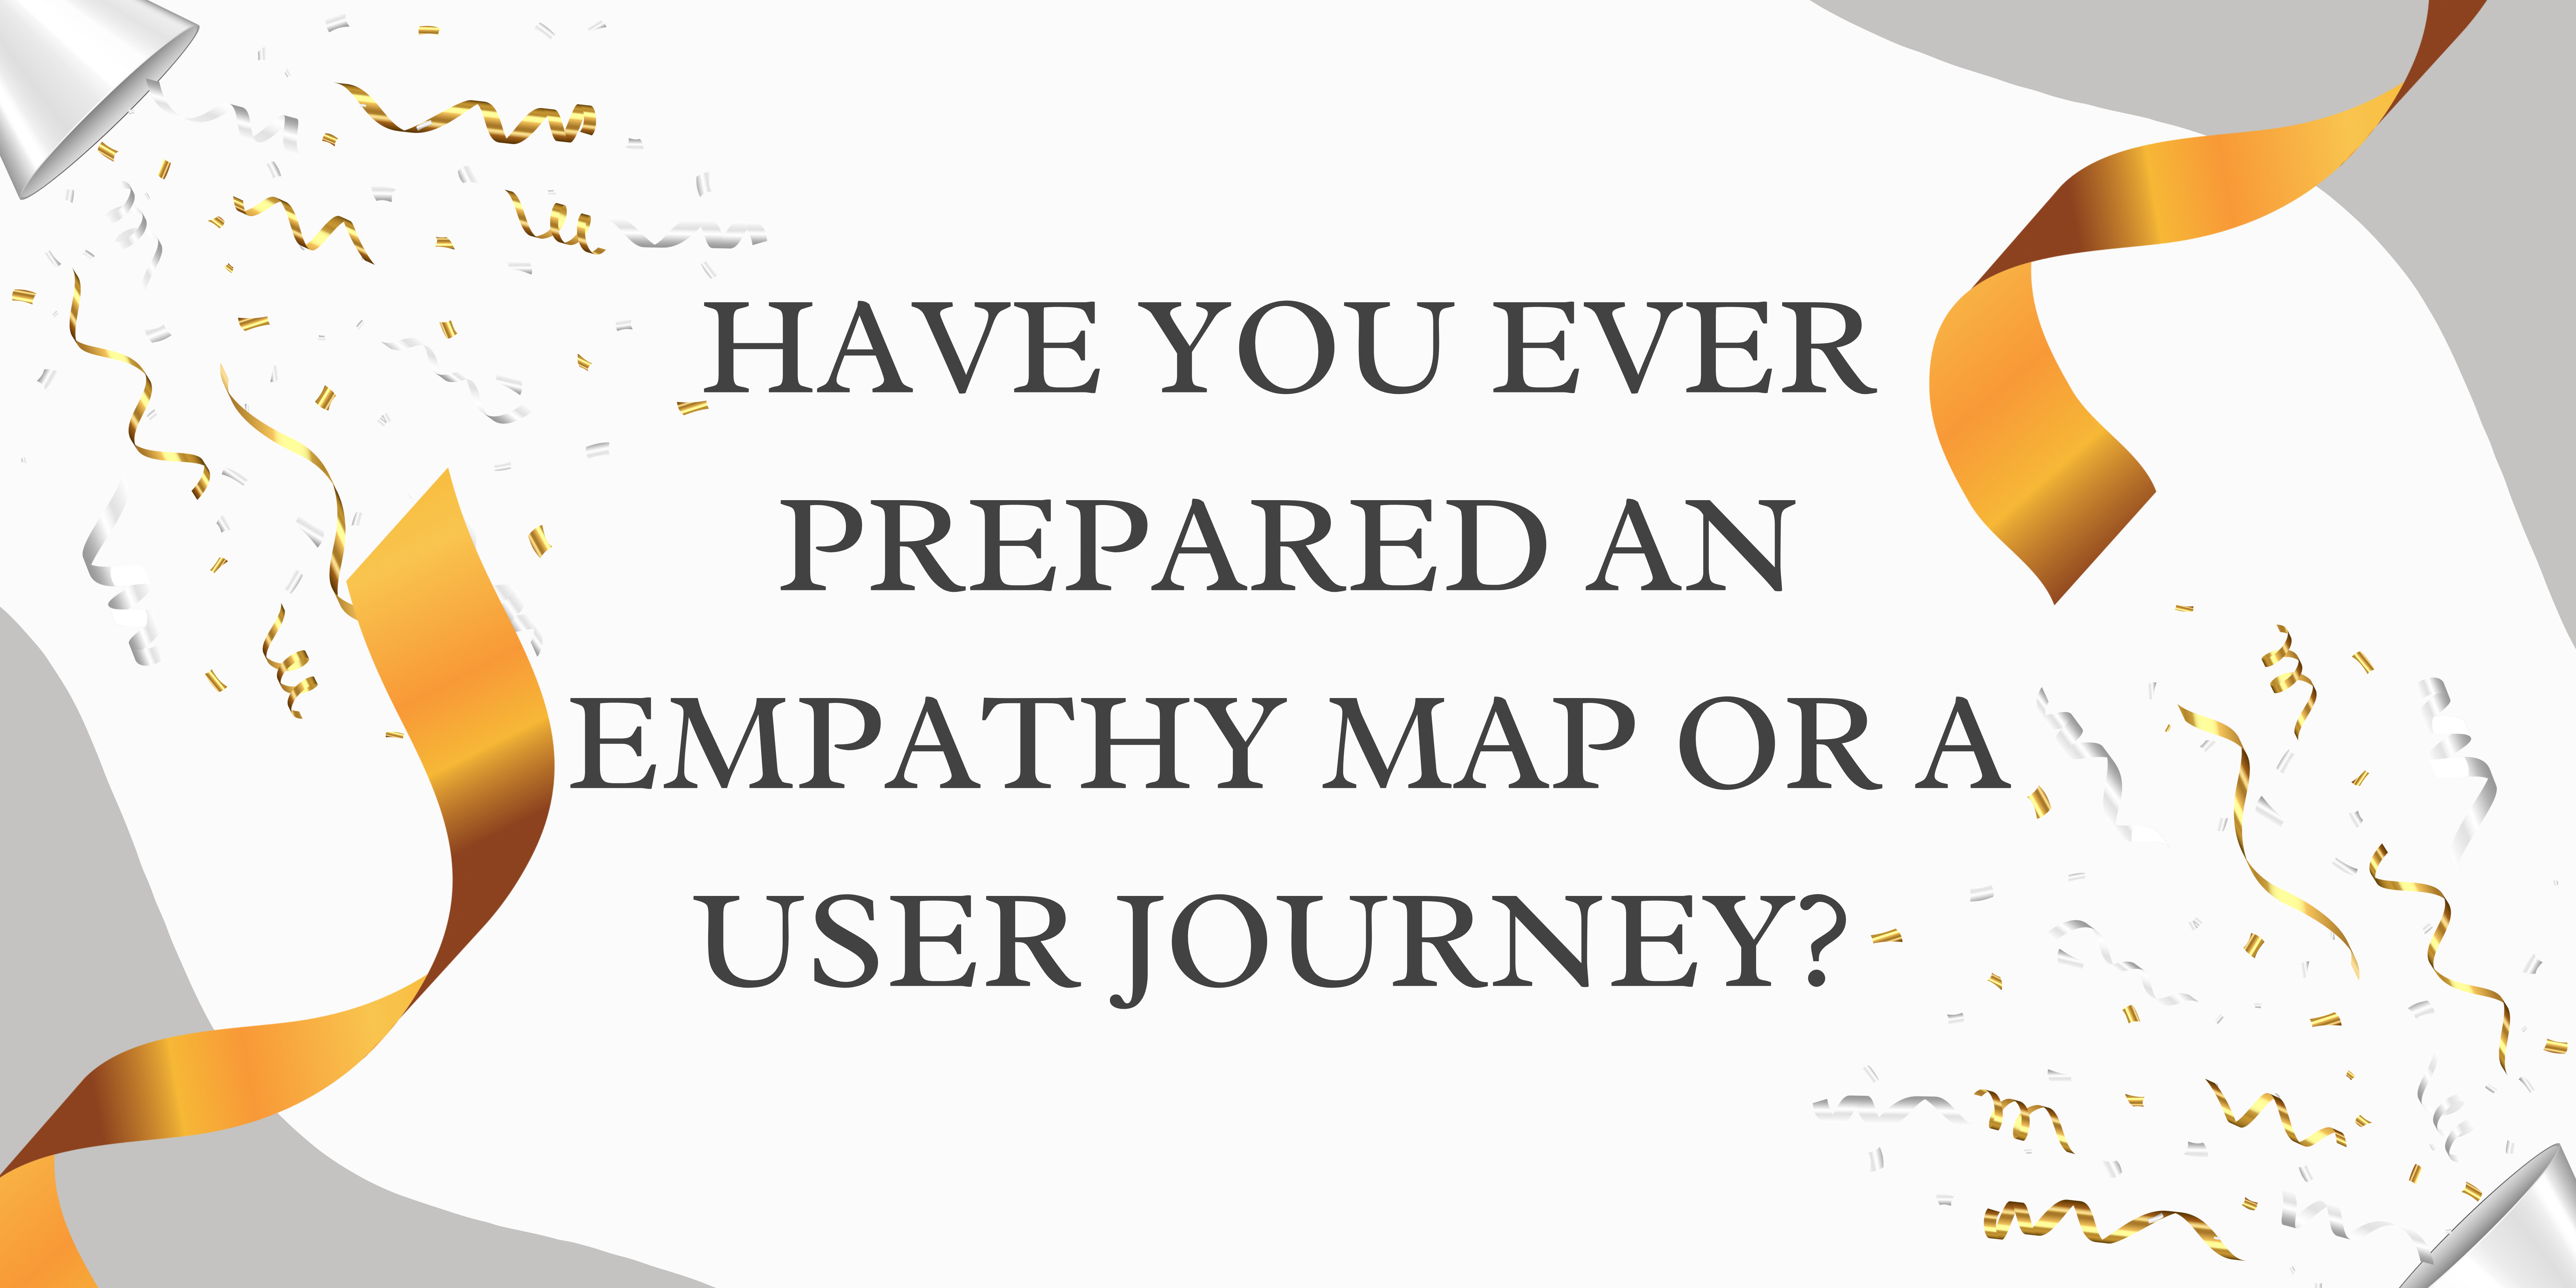 Empathy Mapping and User Journey - The Secret Sauce for Effective Technical Writing